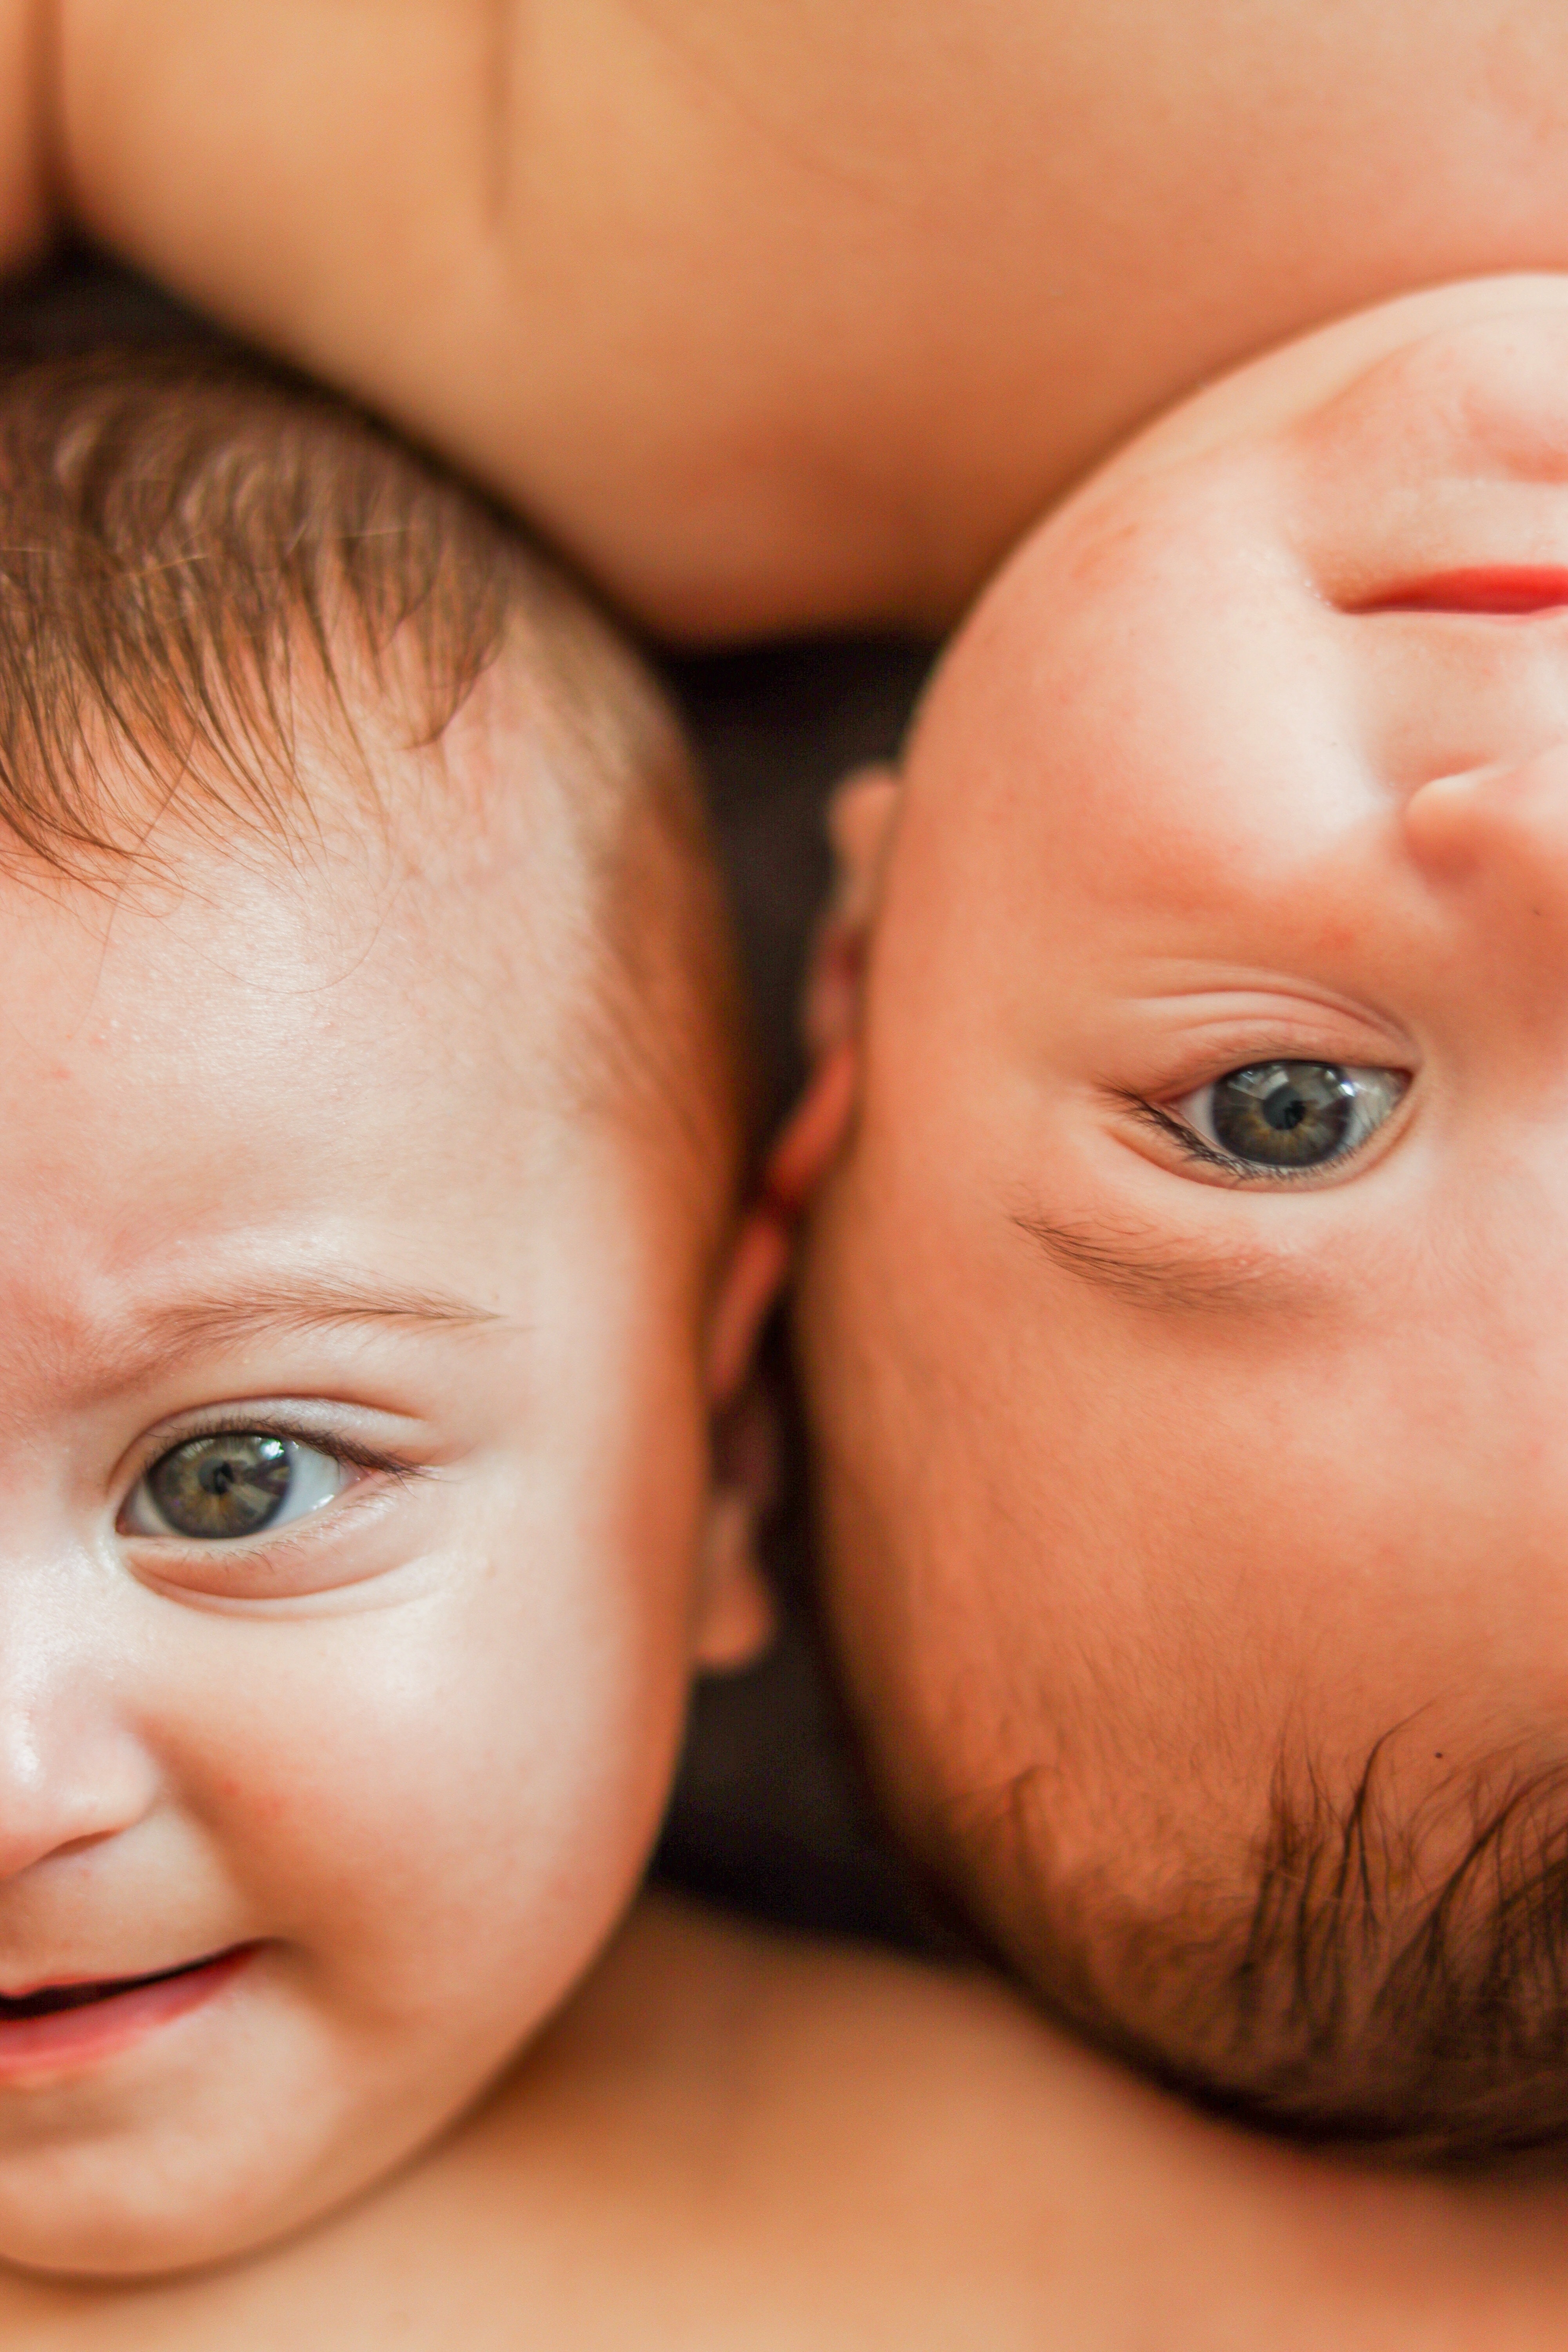 A pair of twins | Source: Pexels